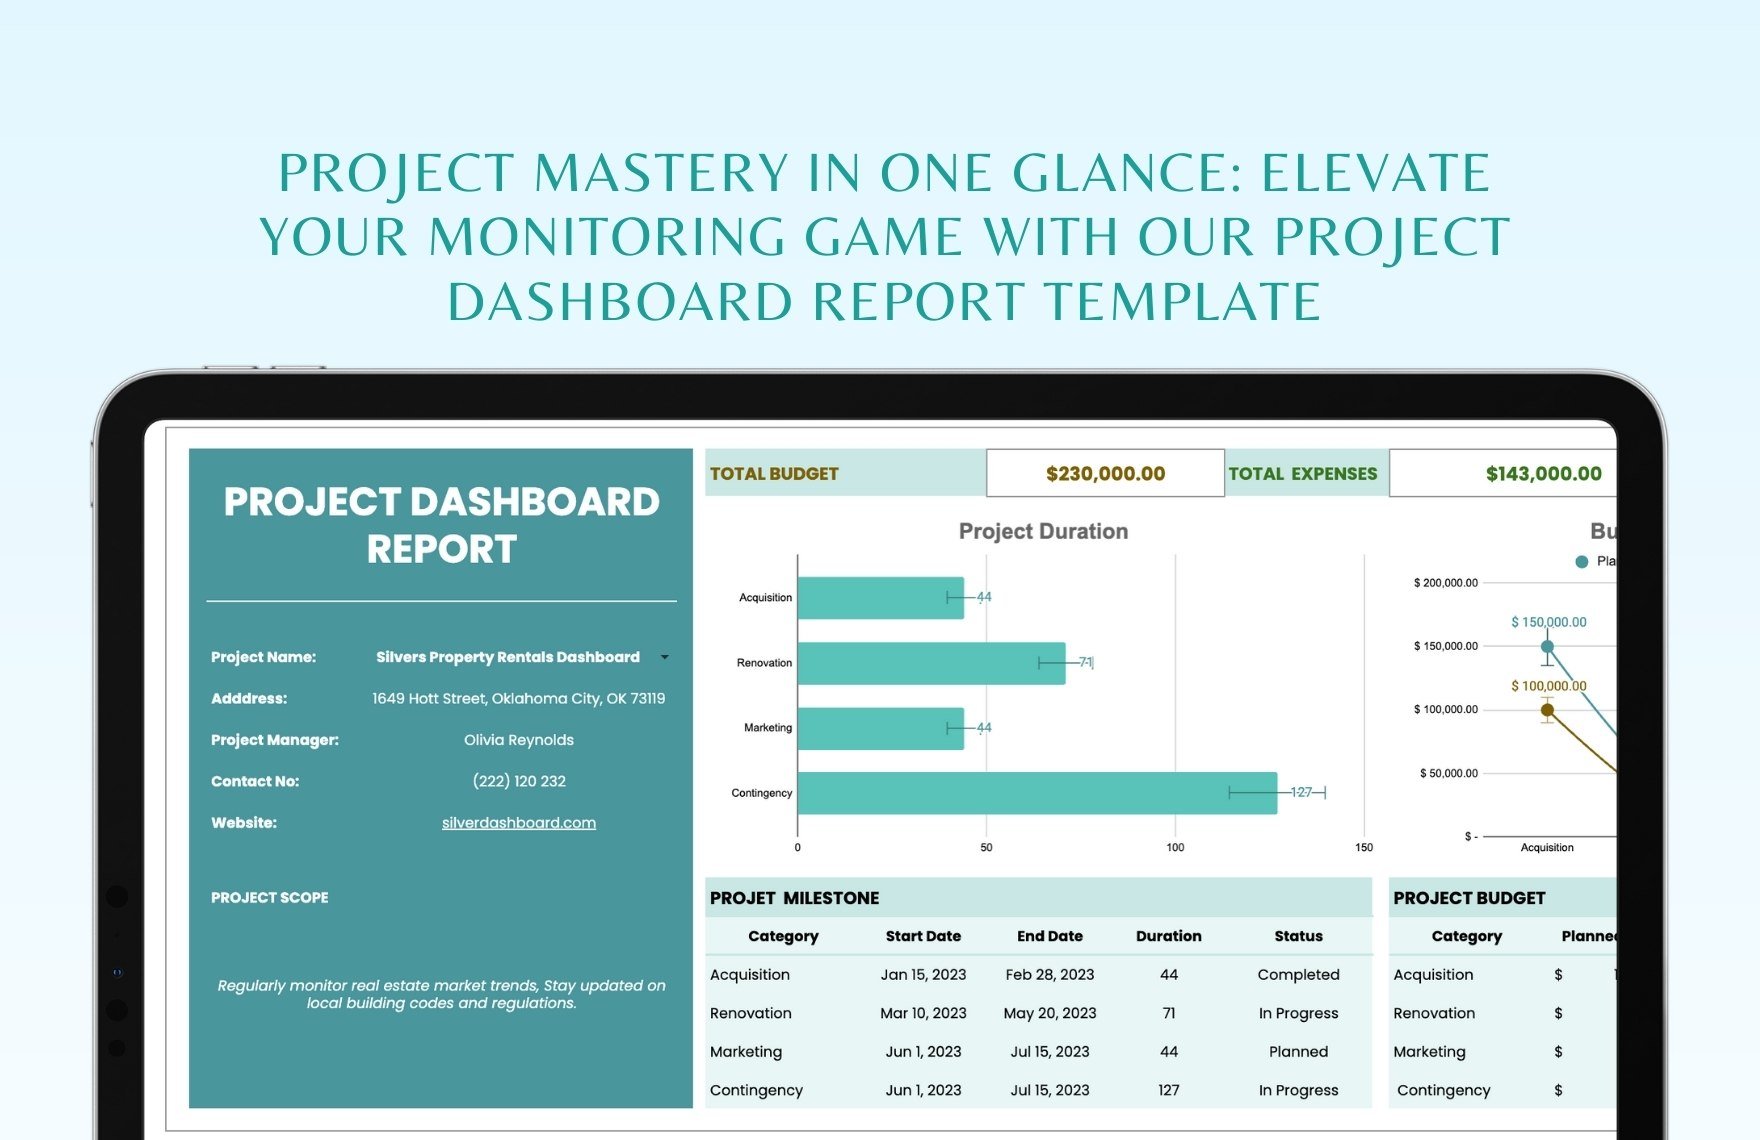 Project Dashboard Report Template